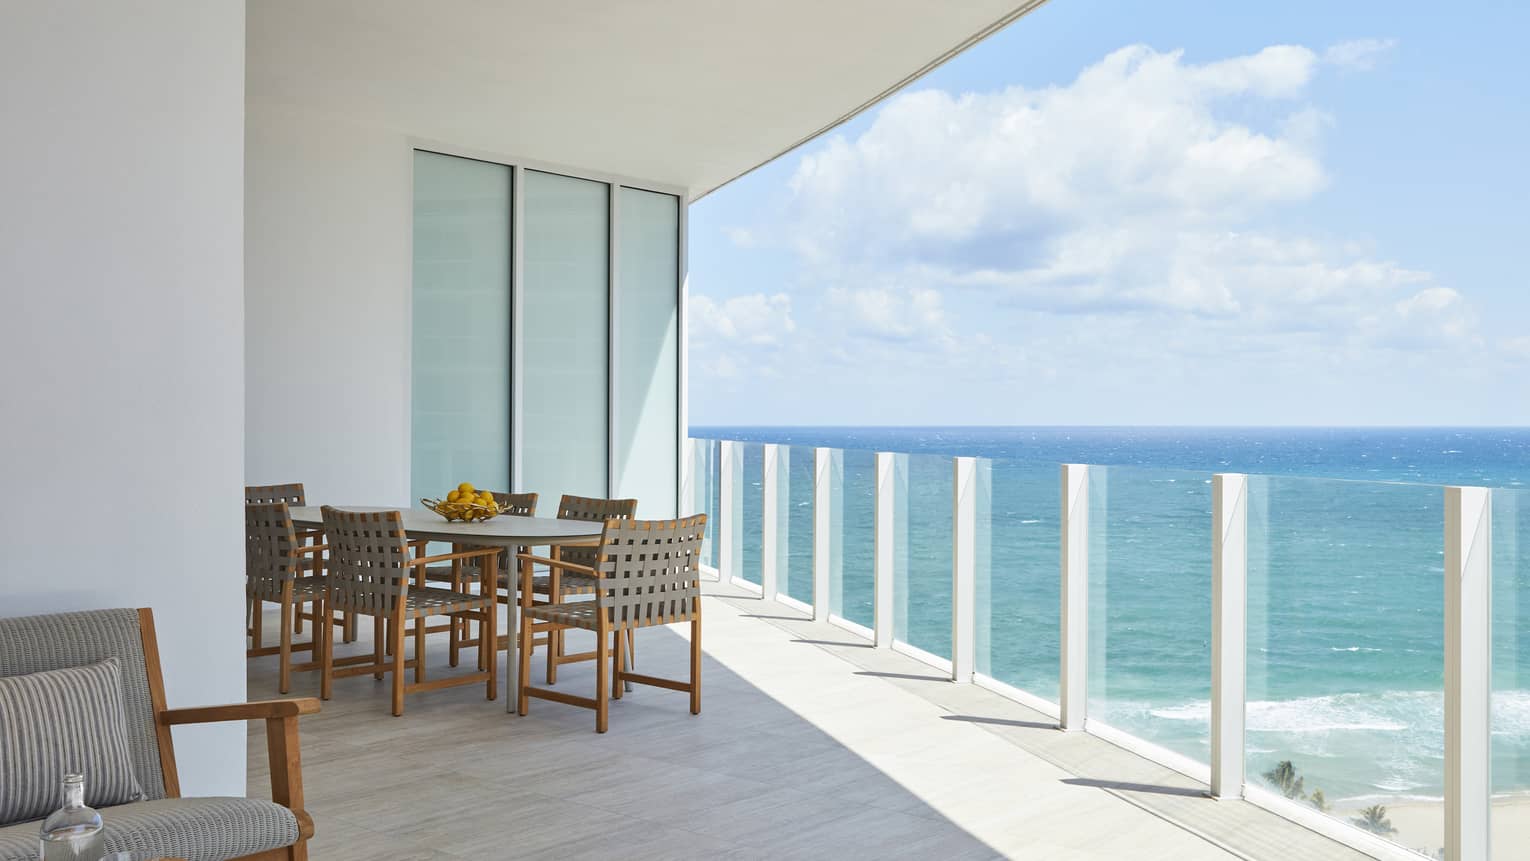 Glass railing balcony with dining table, ocean view